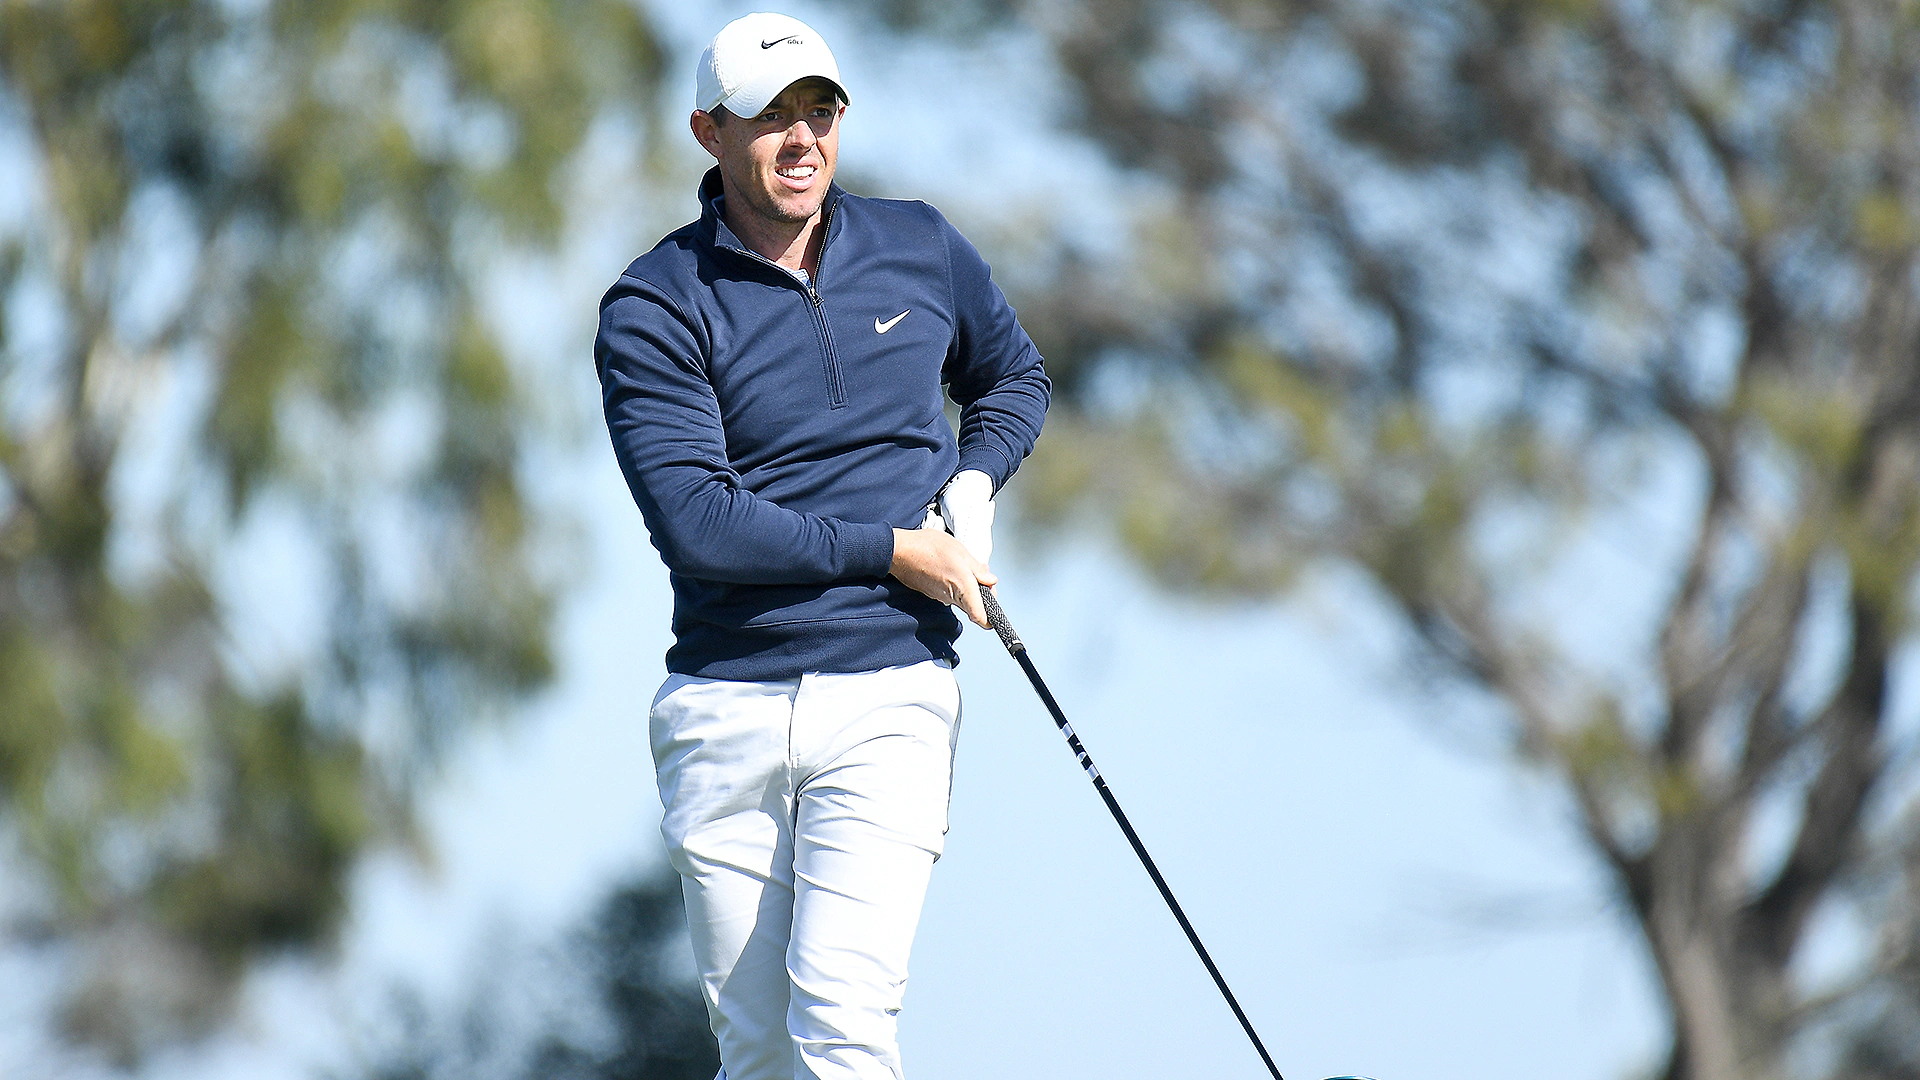 Rory McIlroy nominated to be PGA Tour player advisory council chairman